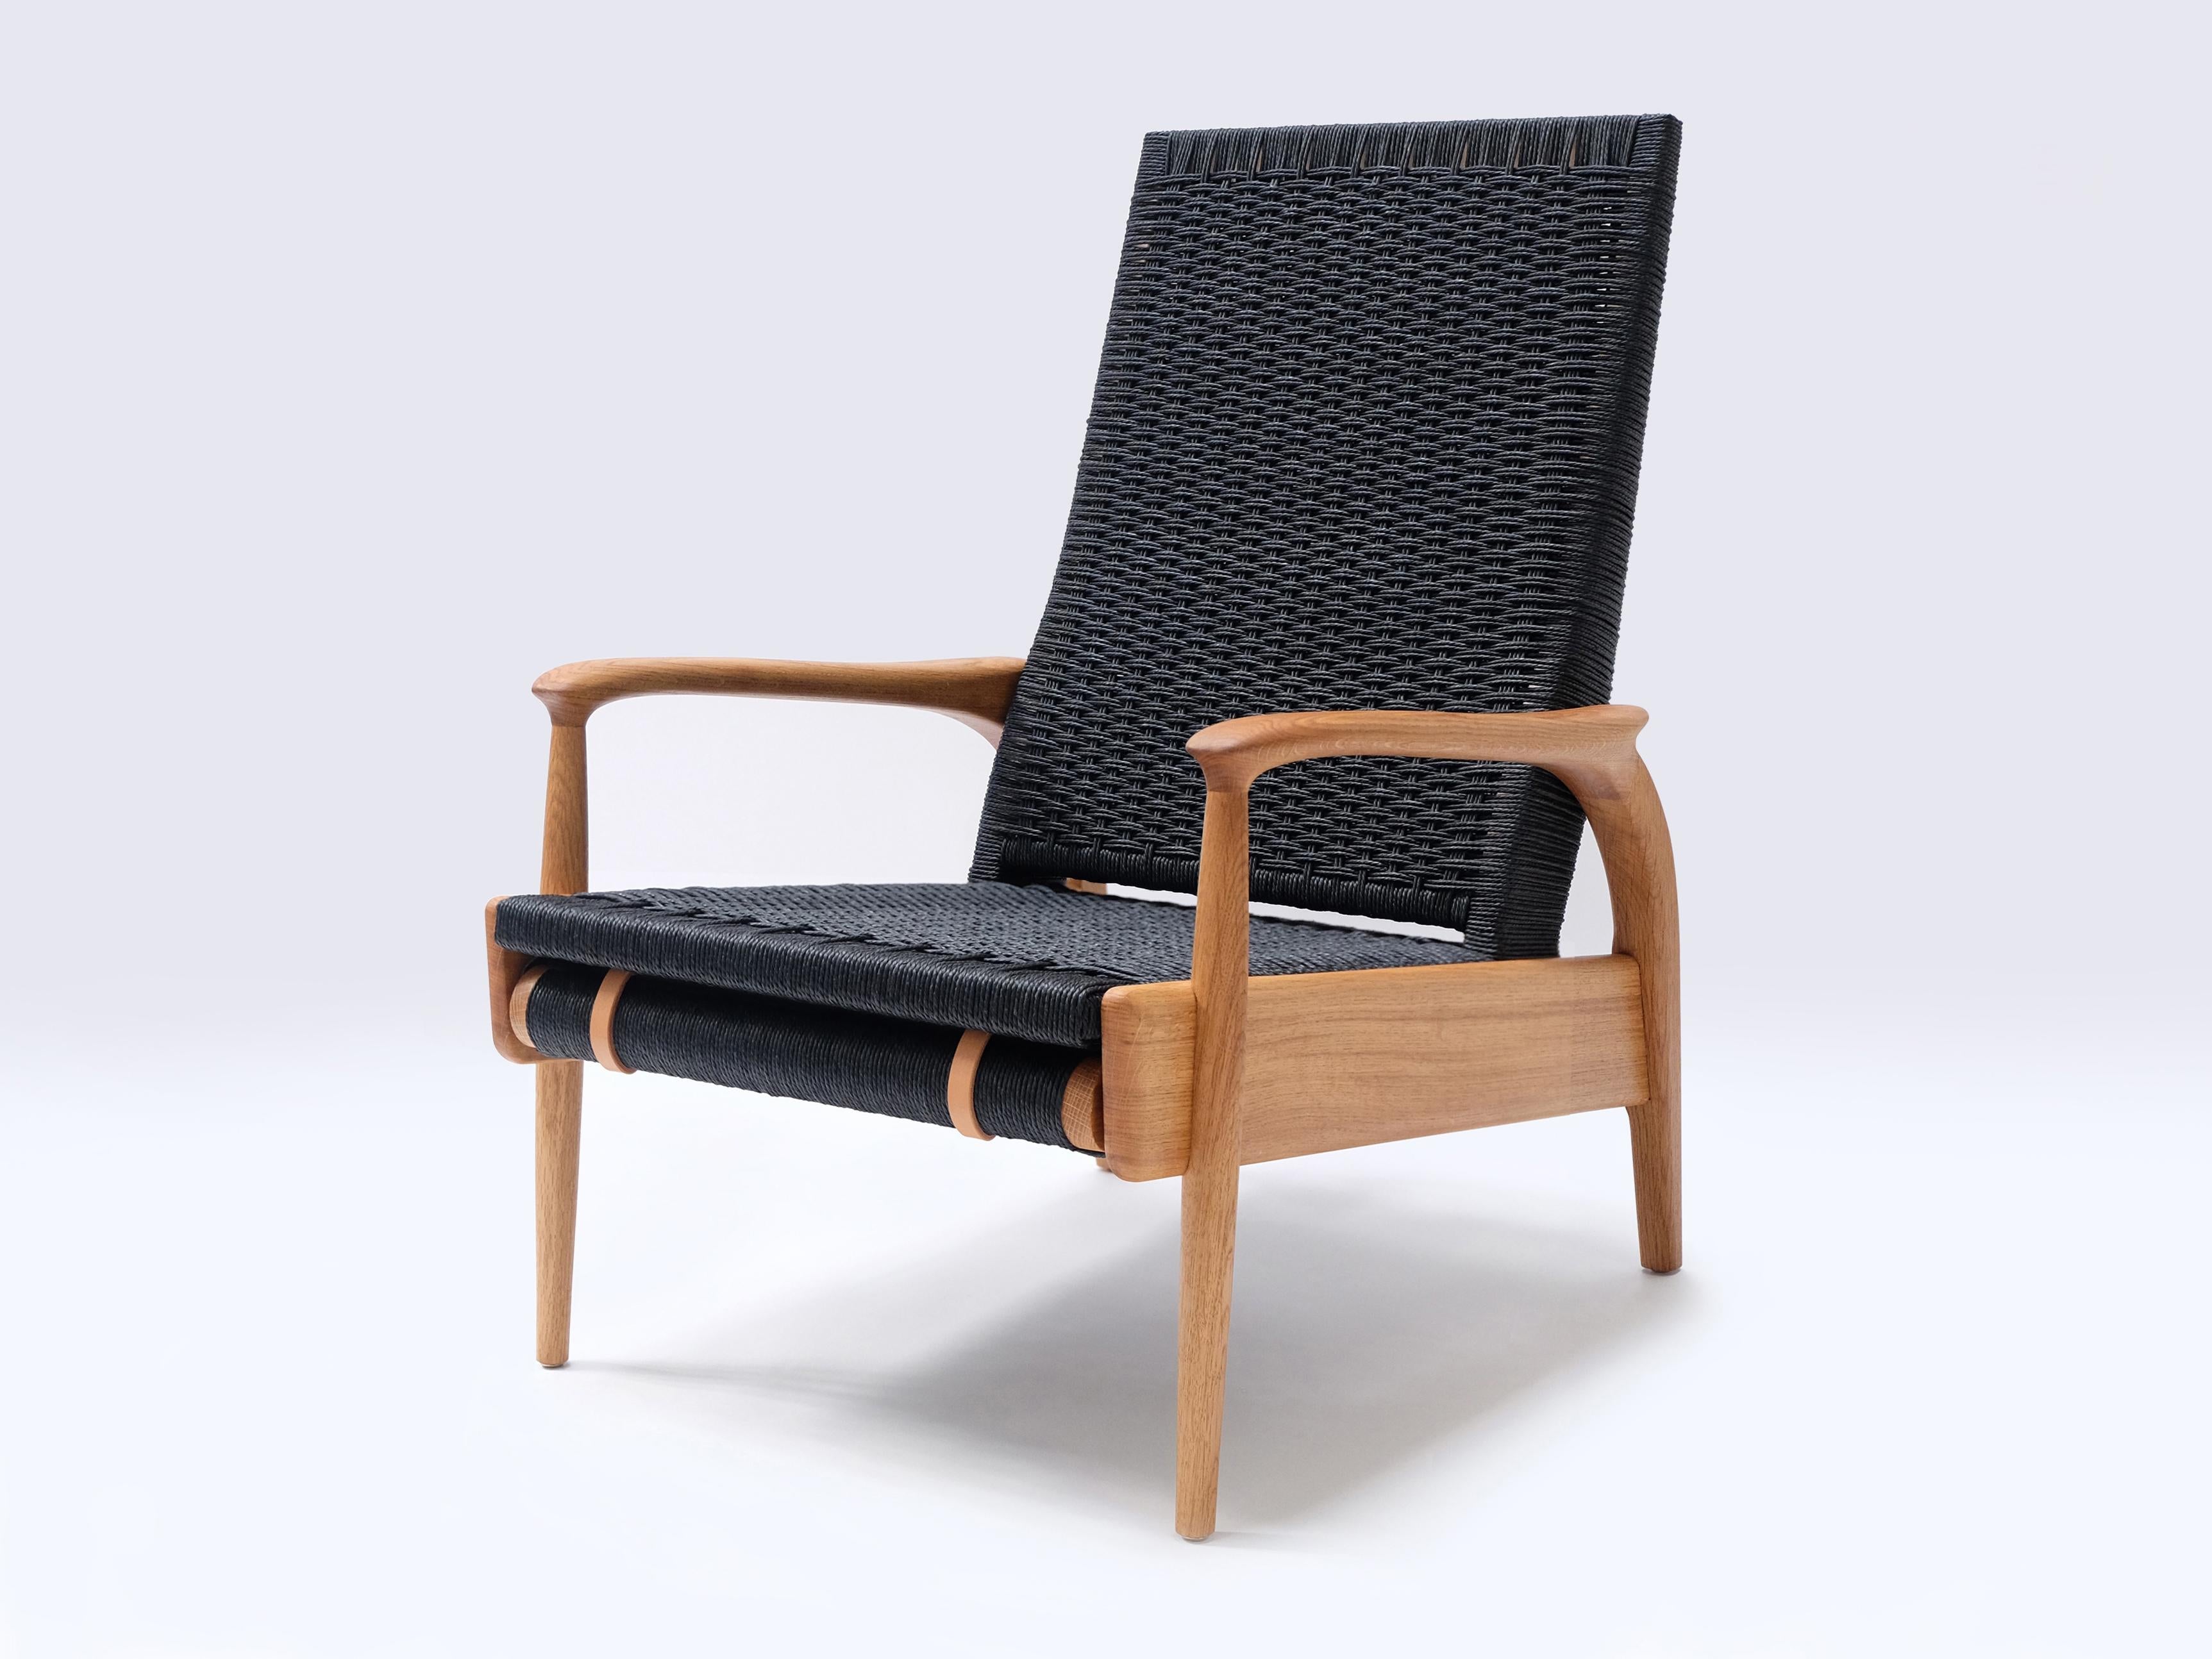 Custom-Made Lounge Chair in Solid Oak& Black Danish Cord with Leather Cushions In New Condition For Sale In London, GB